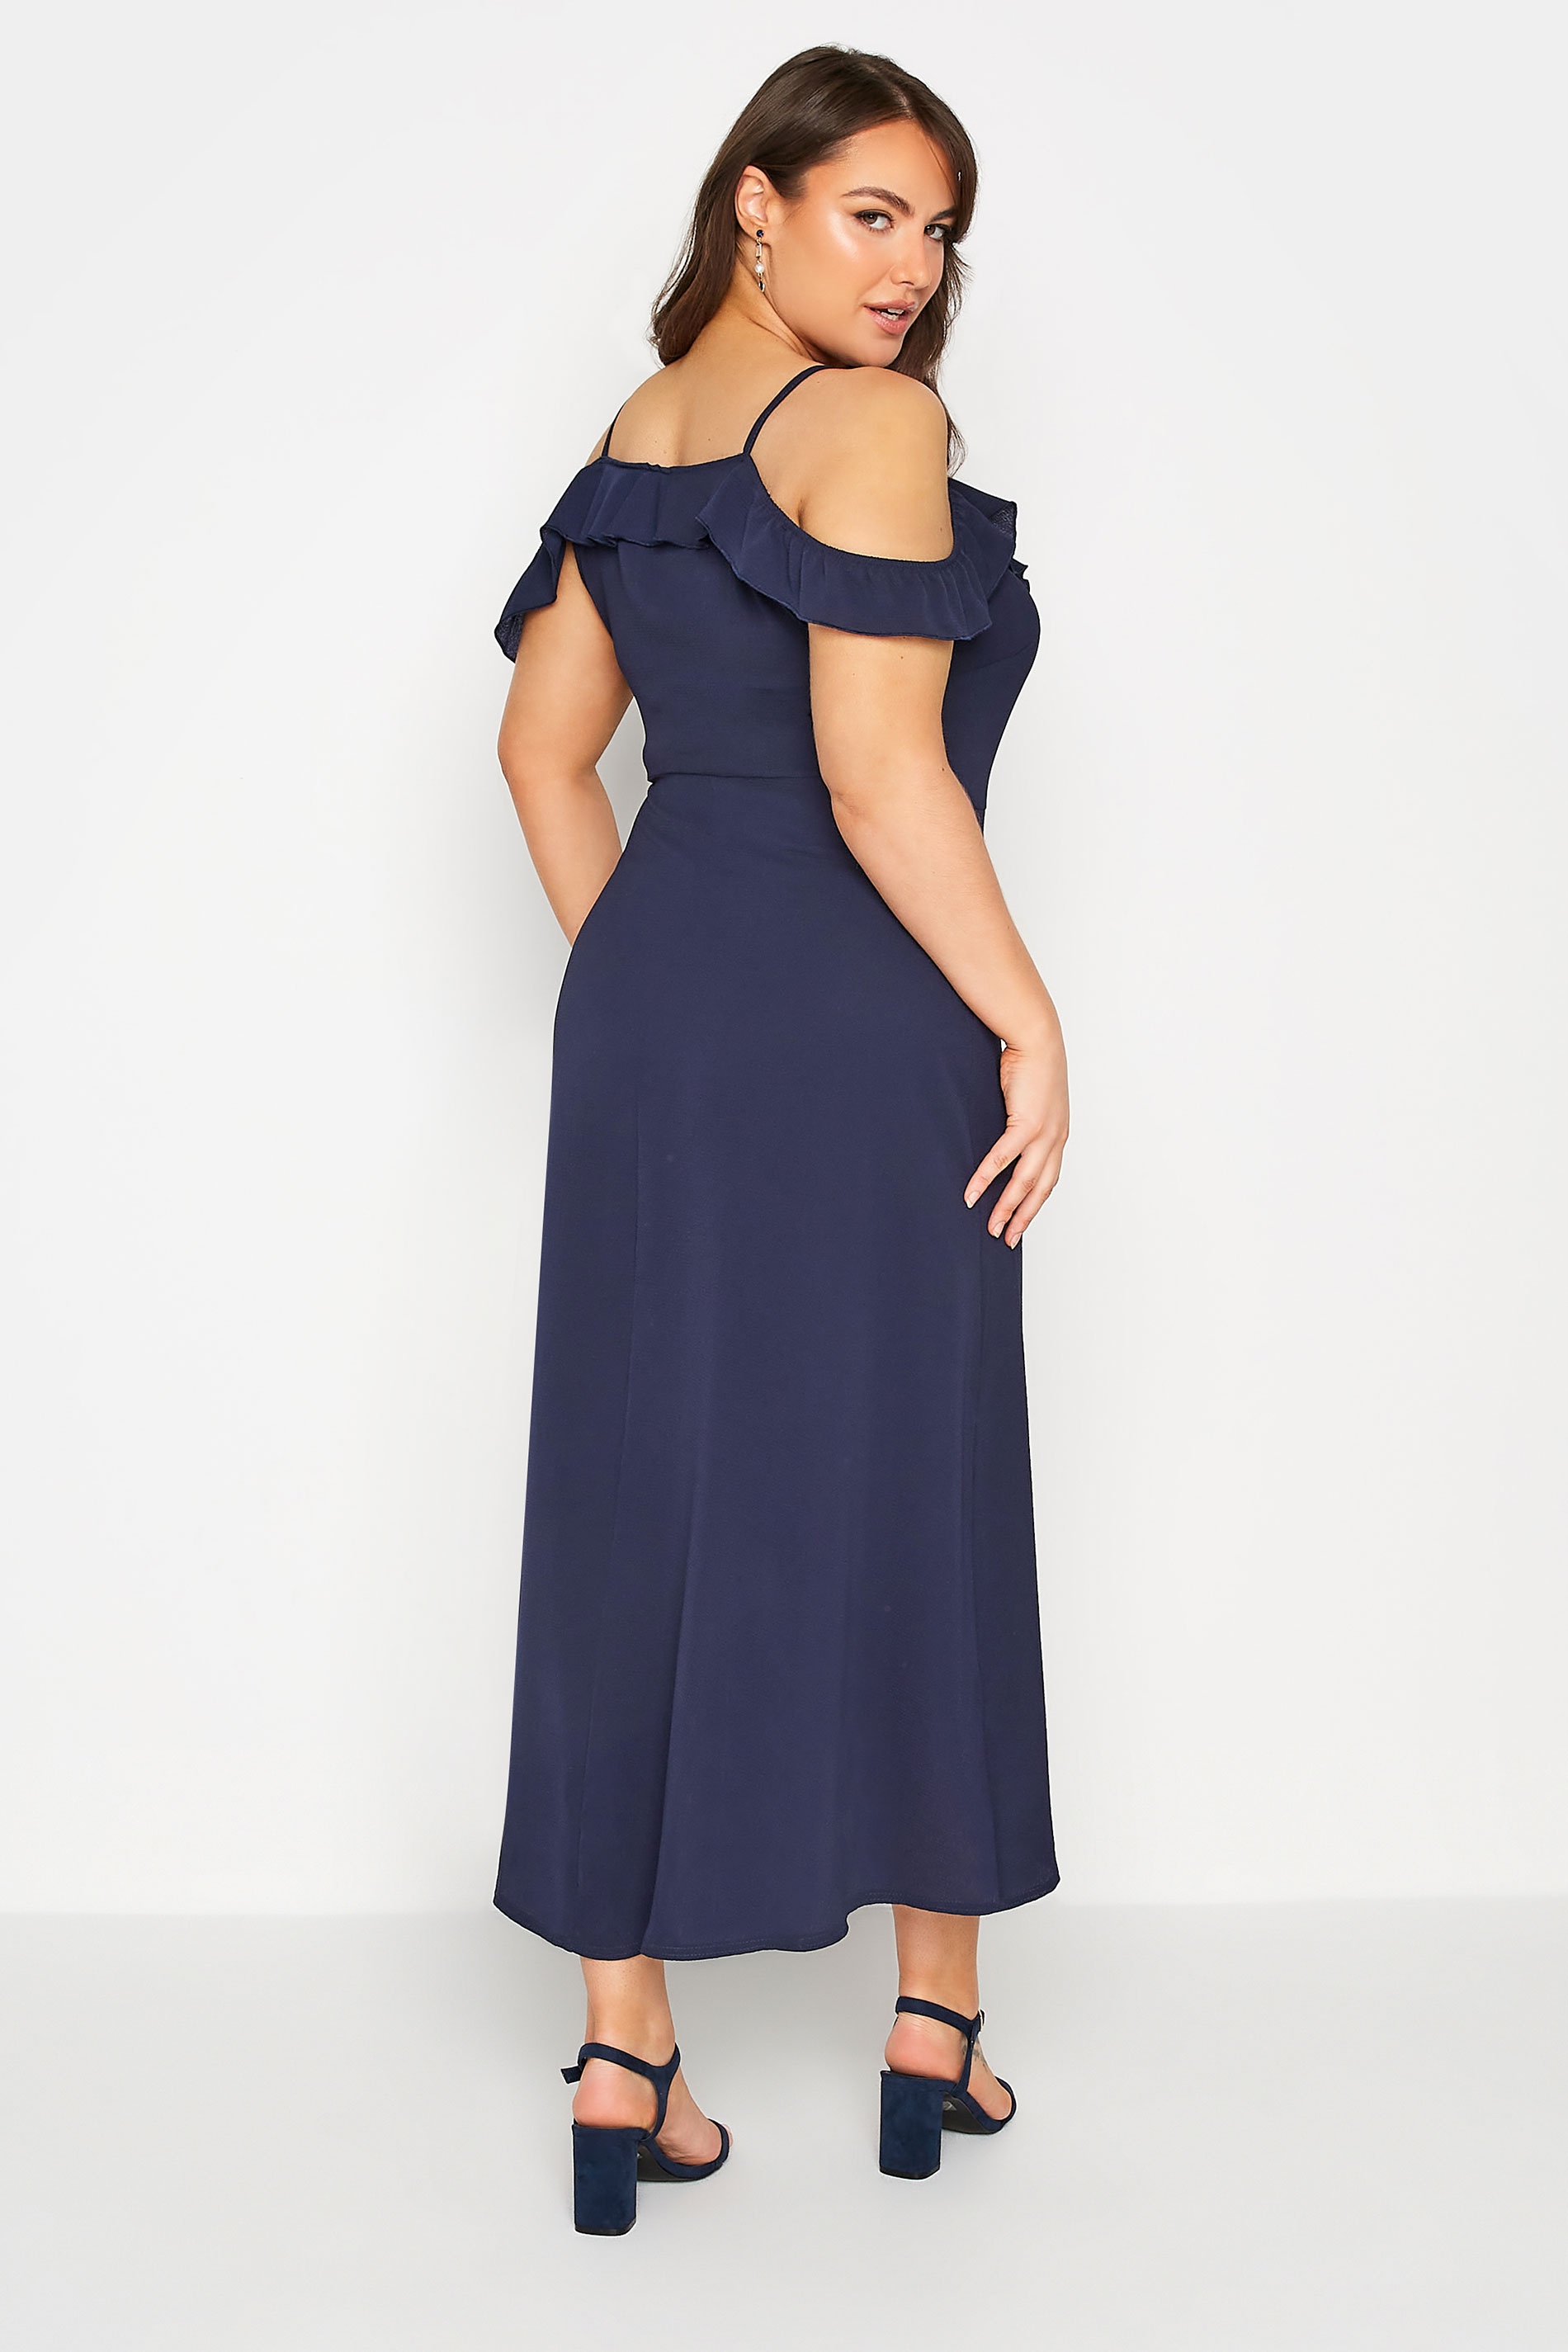 Robes Grande Taille Grande taille  Robes Longues | YOURS LONDON - Robe Maxi Bleue Marine Bardot Volanté - MO21170